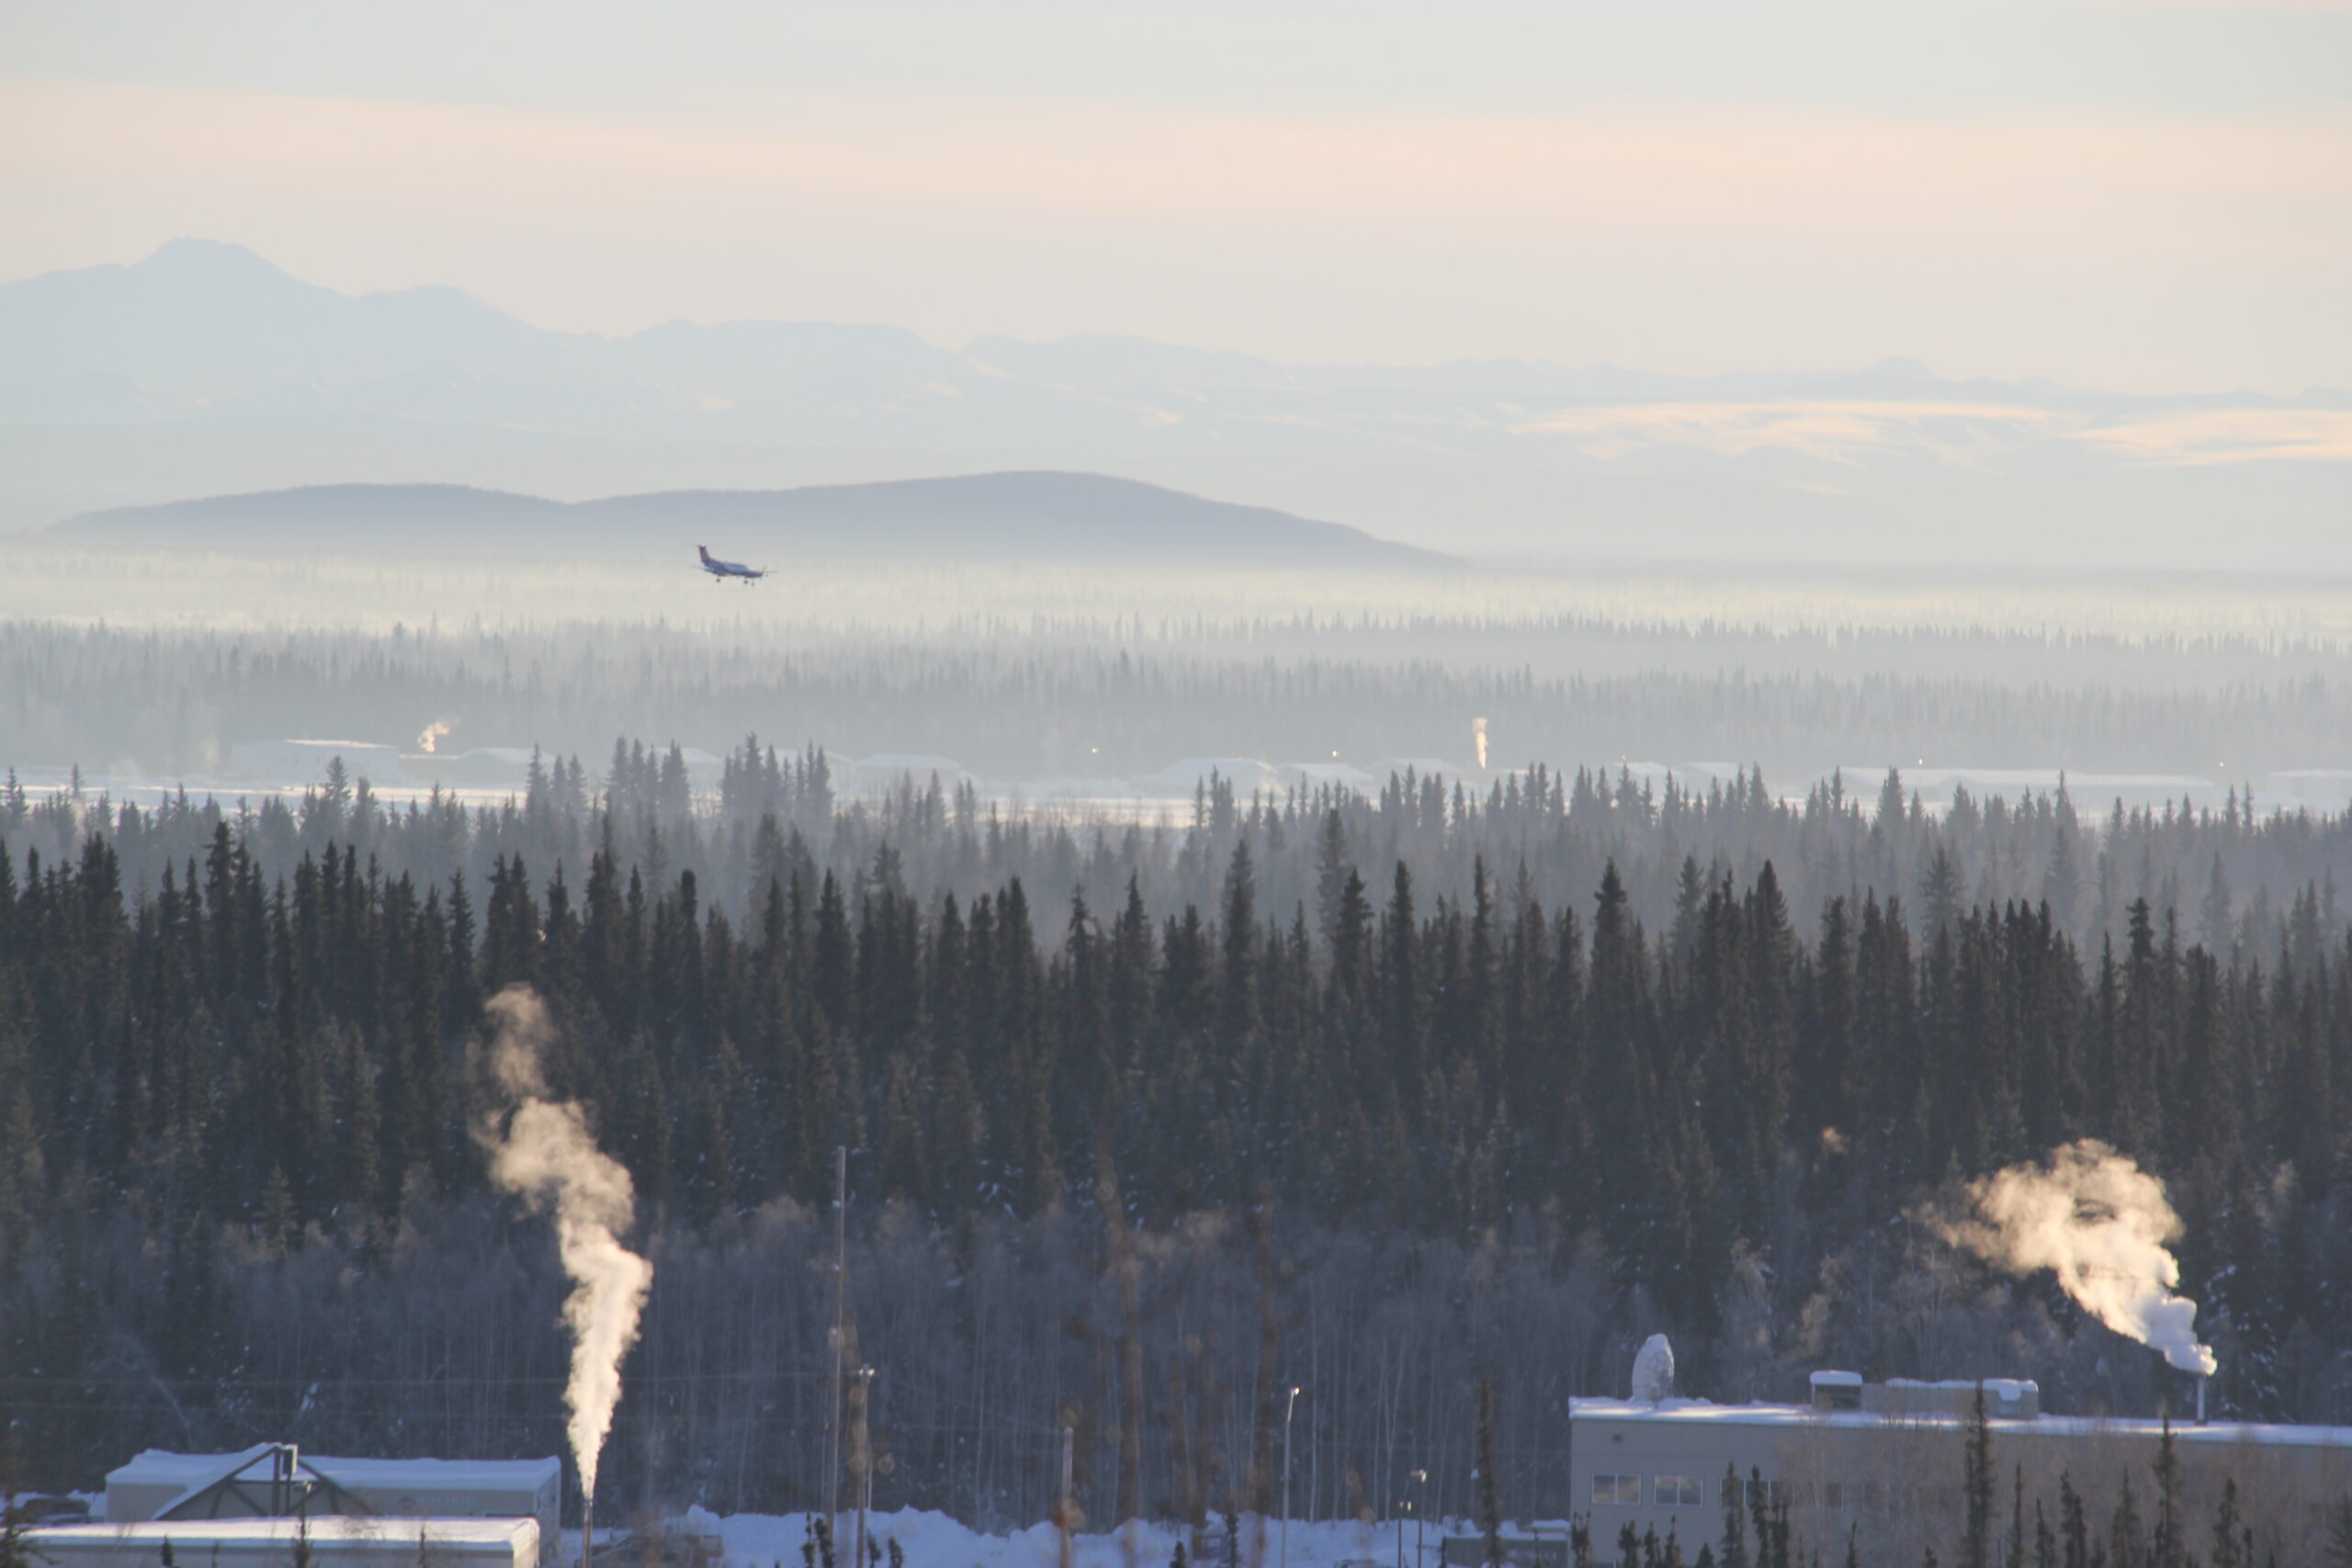 Smoke and haze rising above mostly spruce as a plane lands in the distance